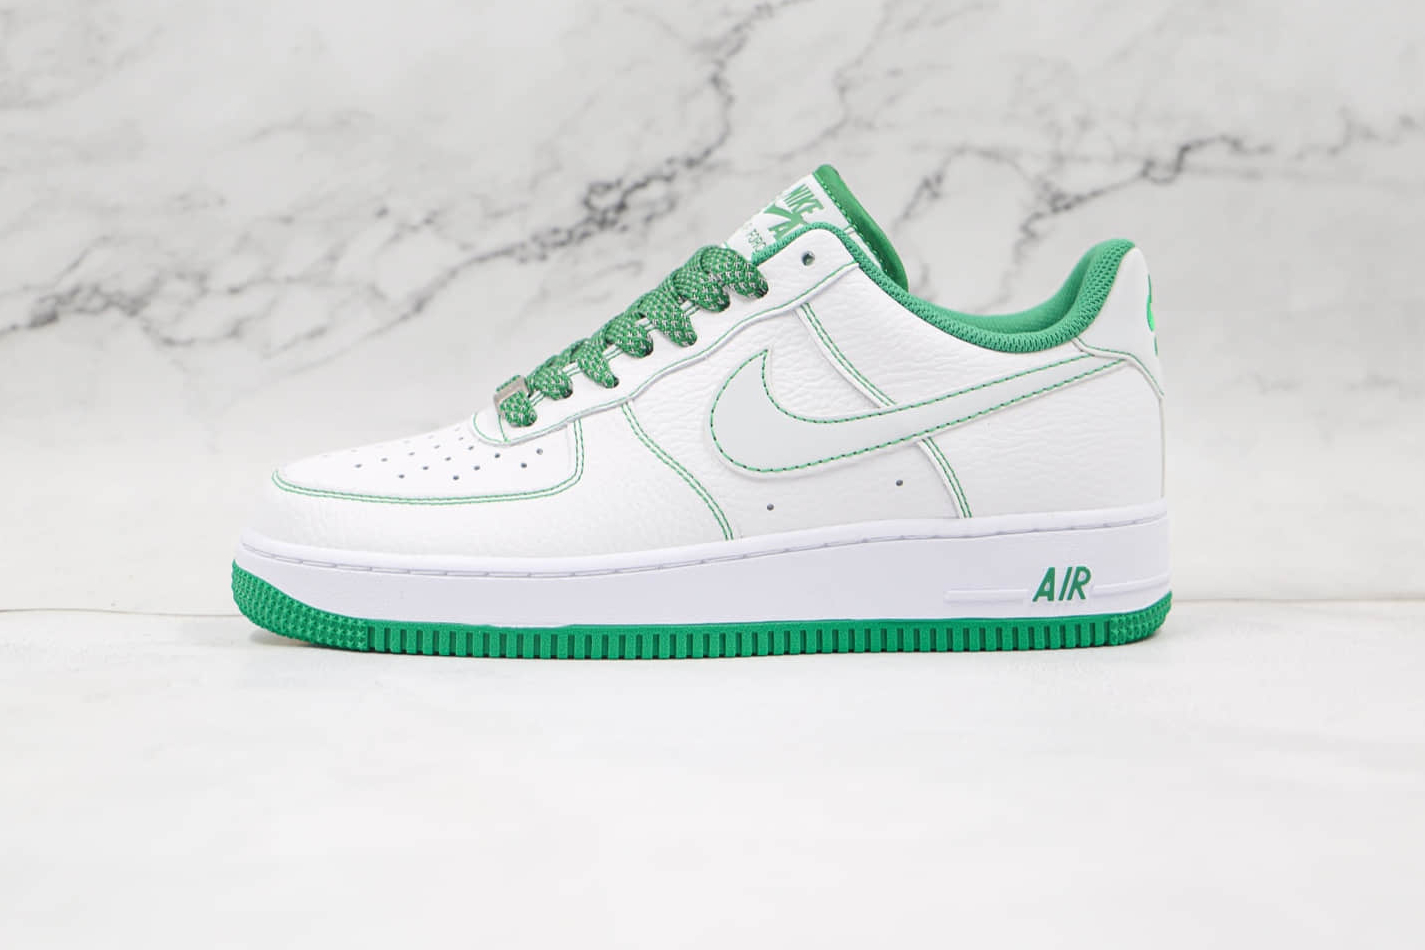 Nike Air Force 1 07 SU19 Low White Green CN2896-103 - Stylish and Comfortable Sneakers